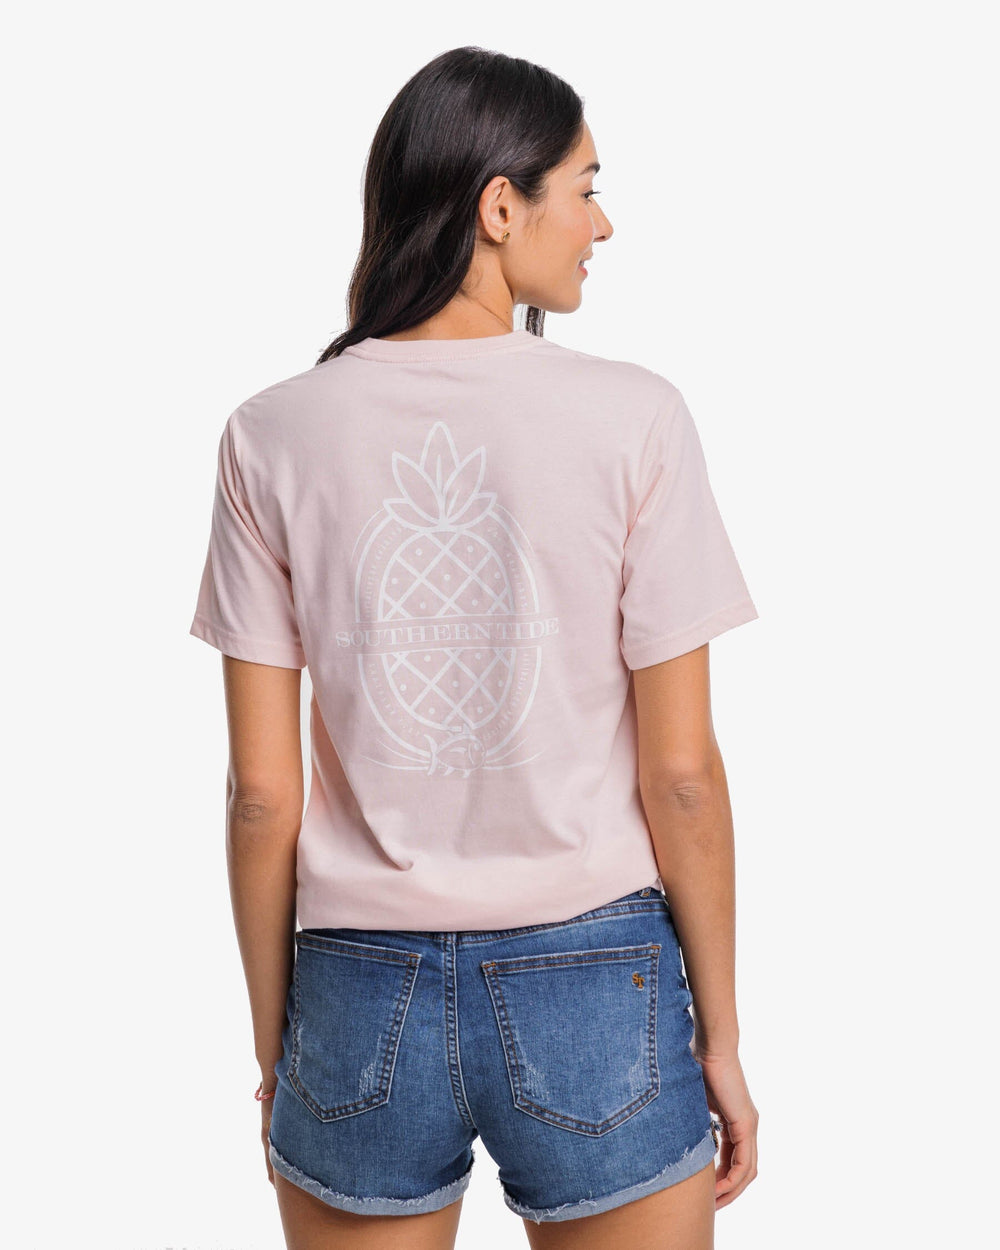 The back view of the Southern Tide Southern Hospitality T-shirt by Southern Tide - Rose Blush